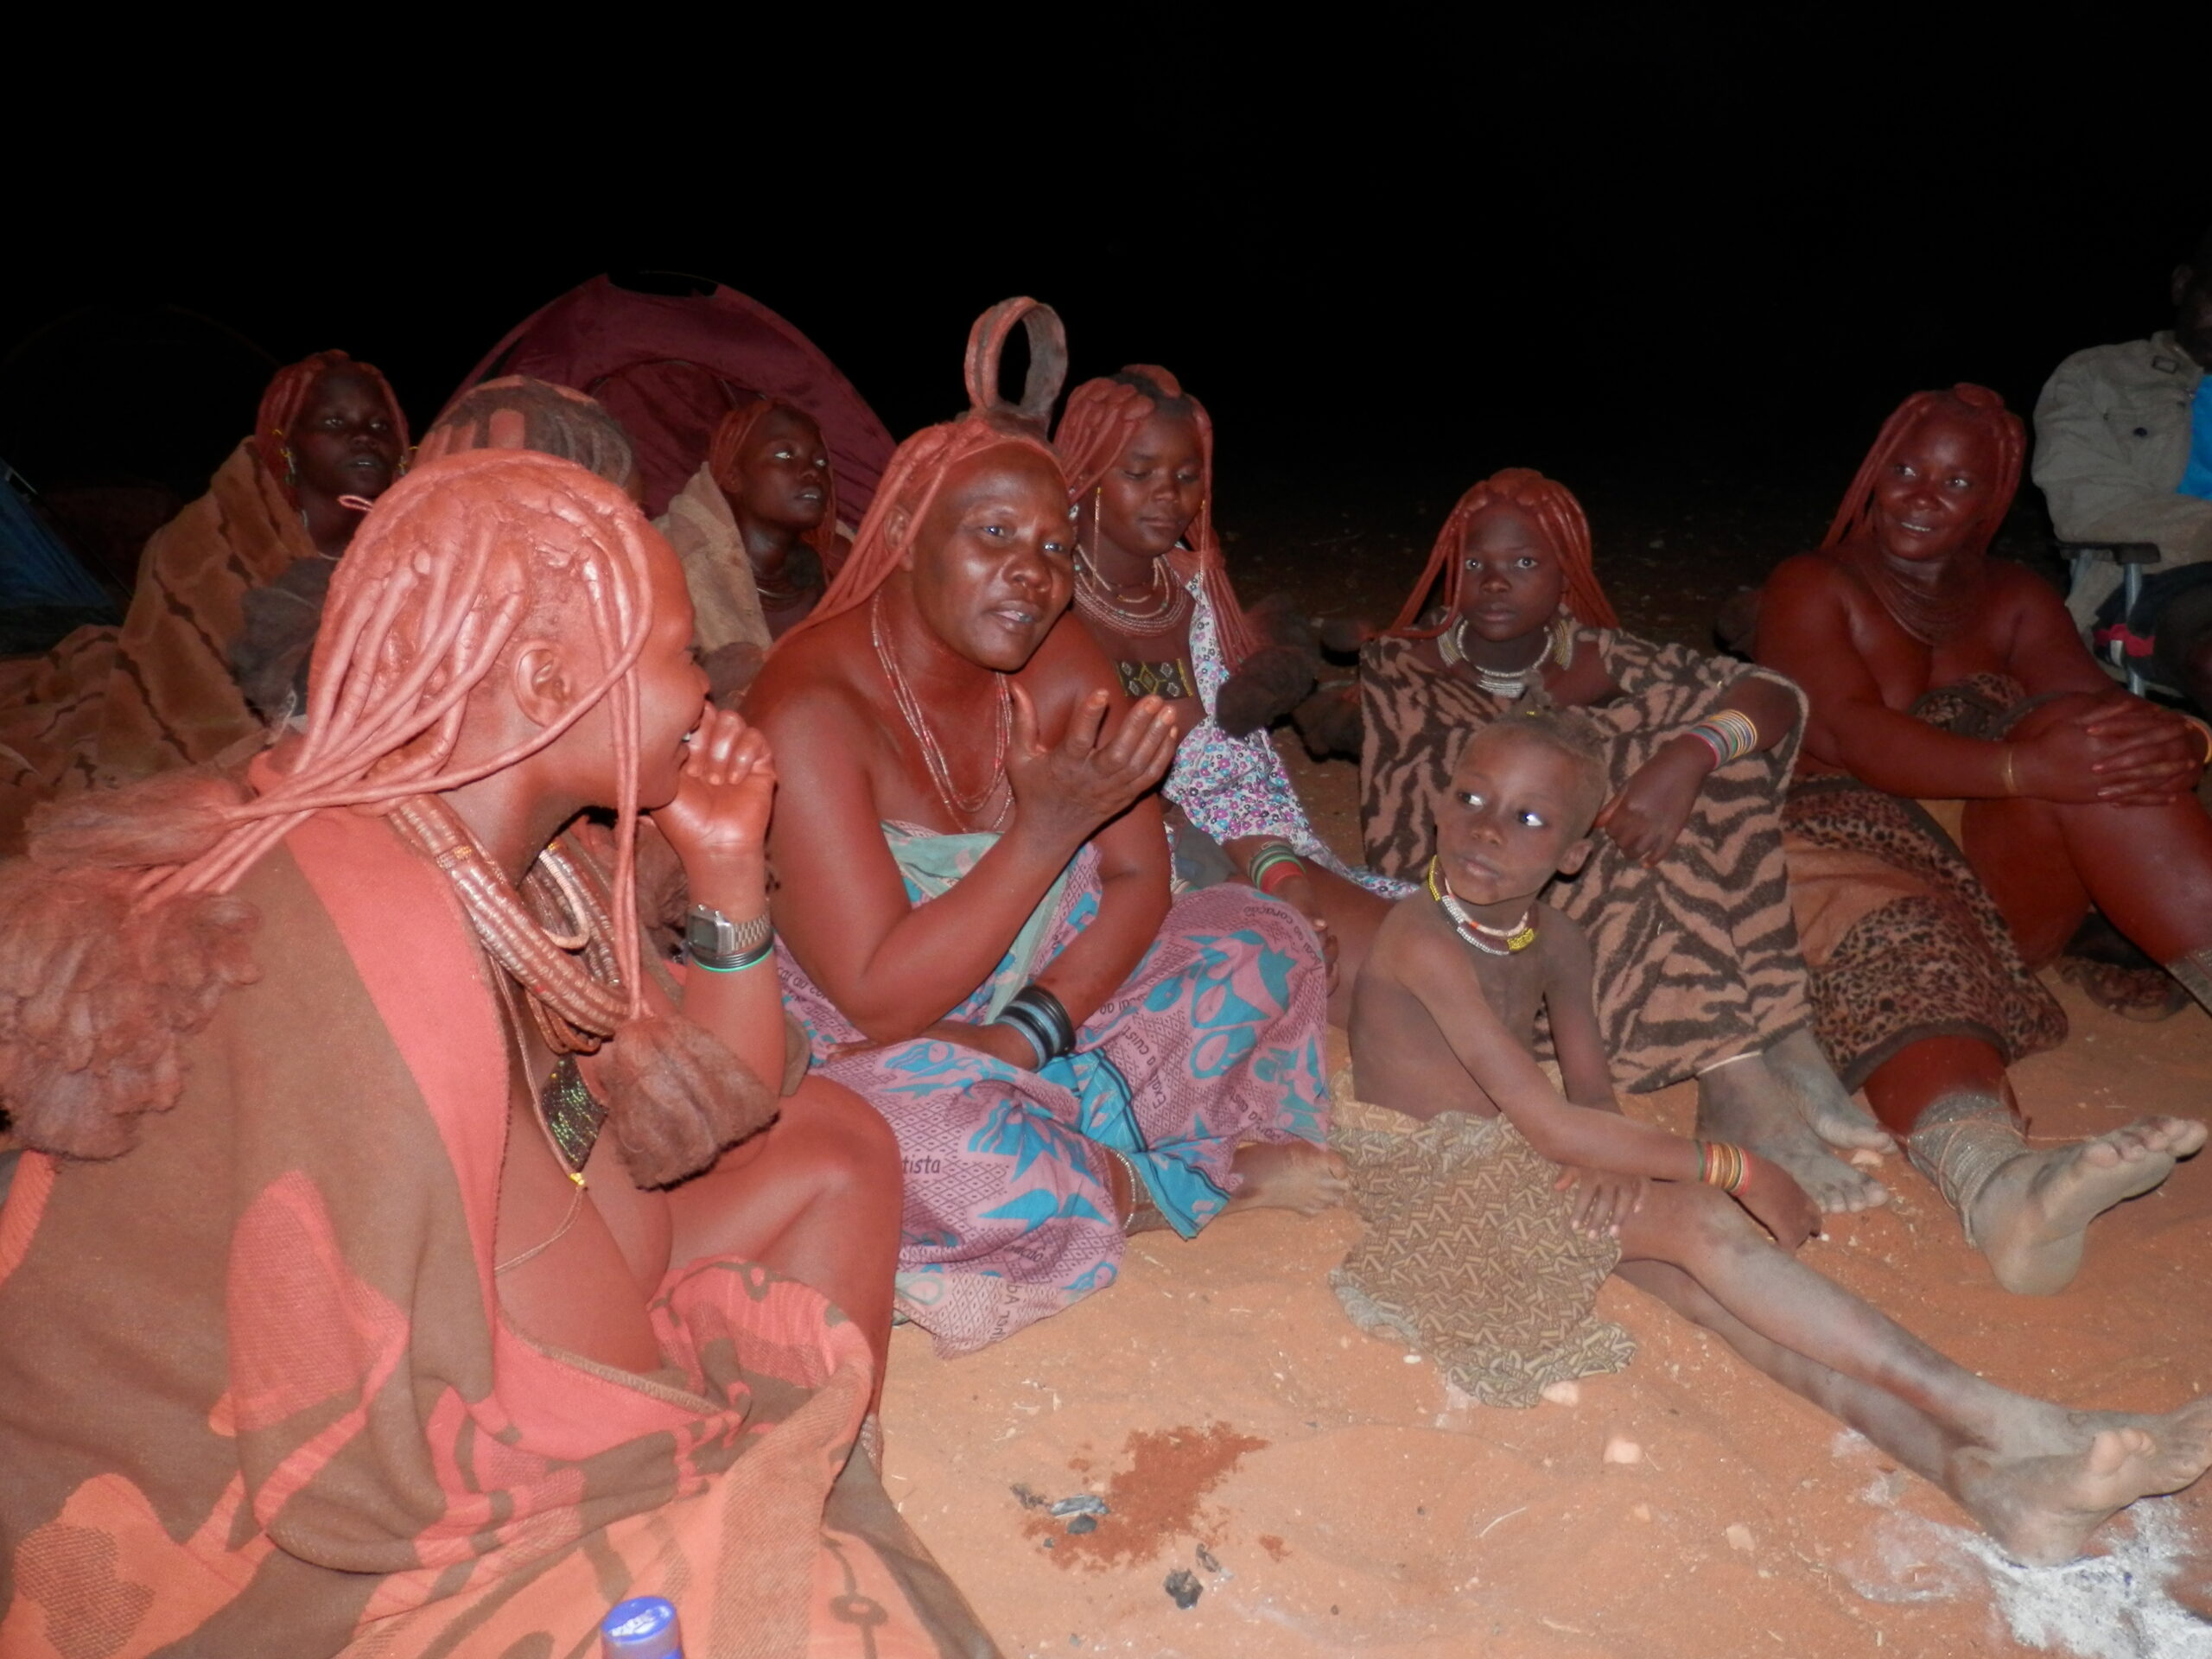 A Himba woman enthusiastically practicing re-telling a story of the Bible in her own language